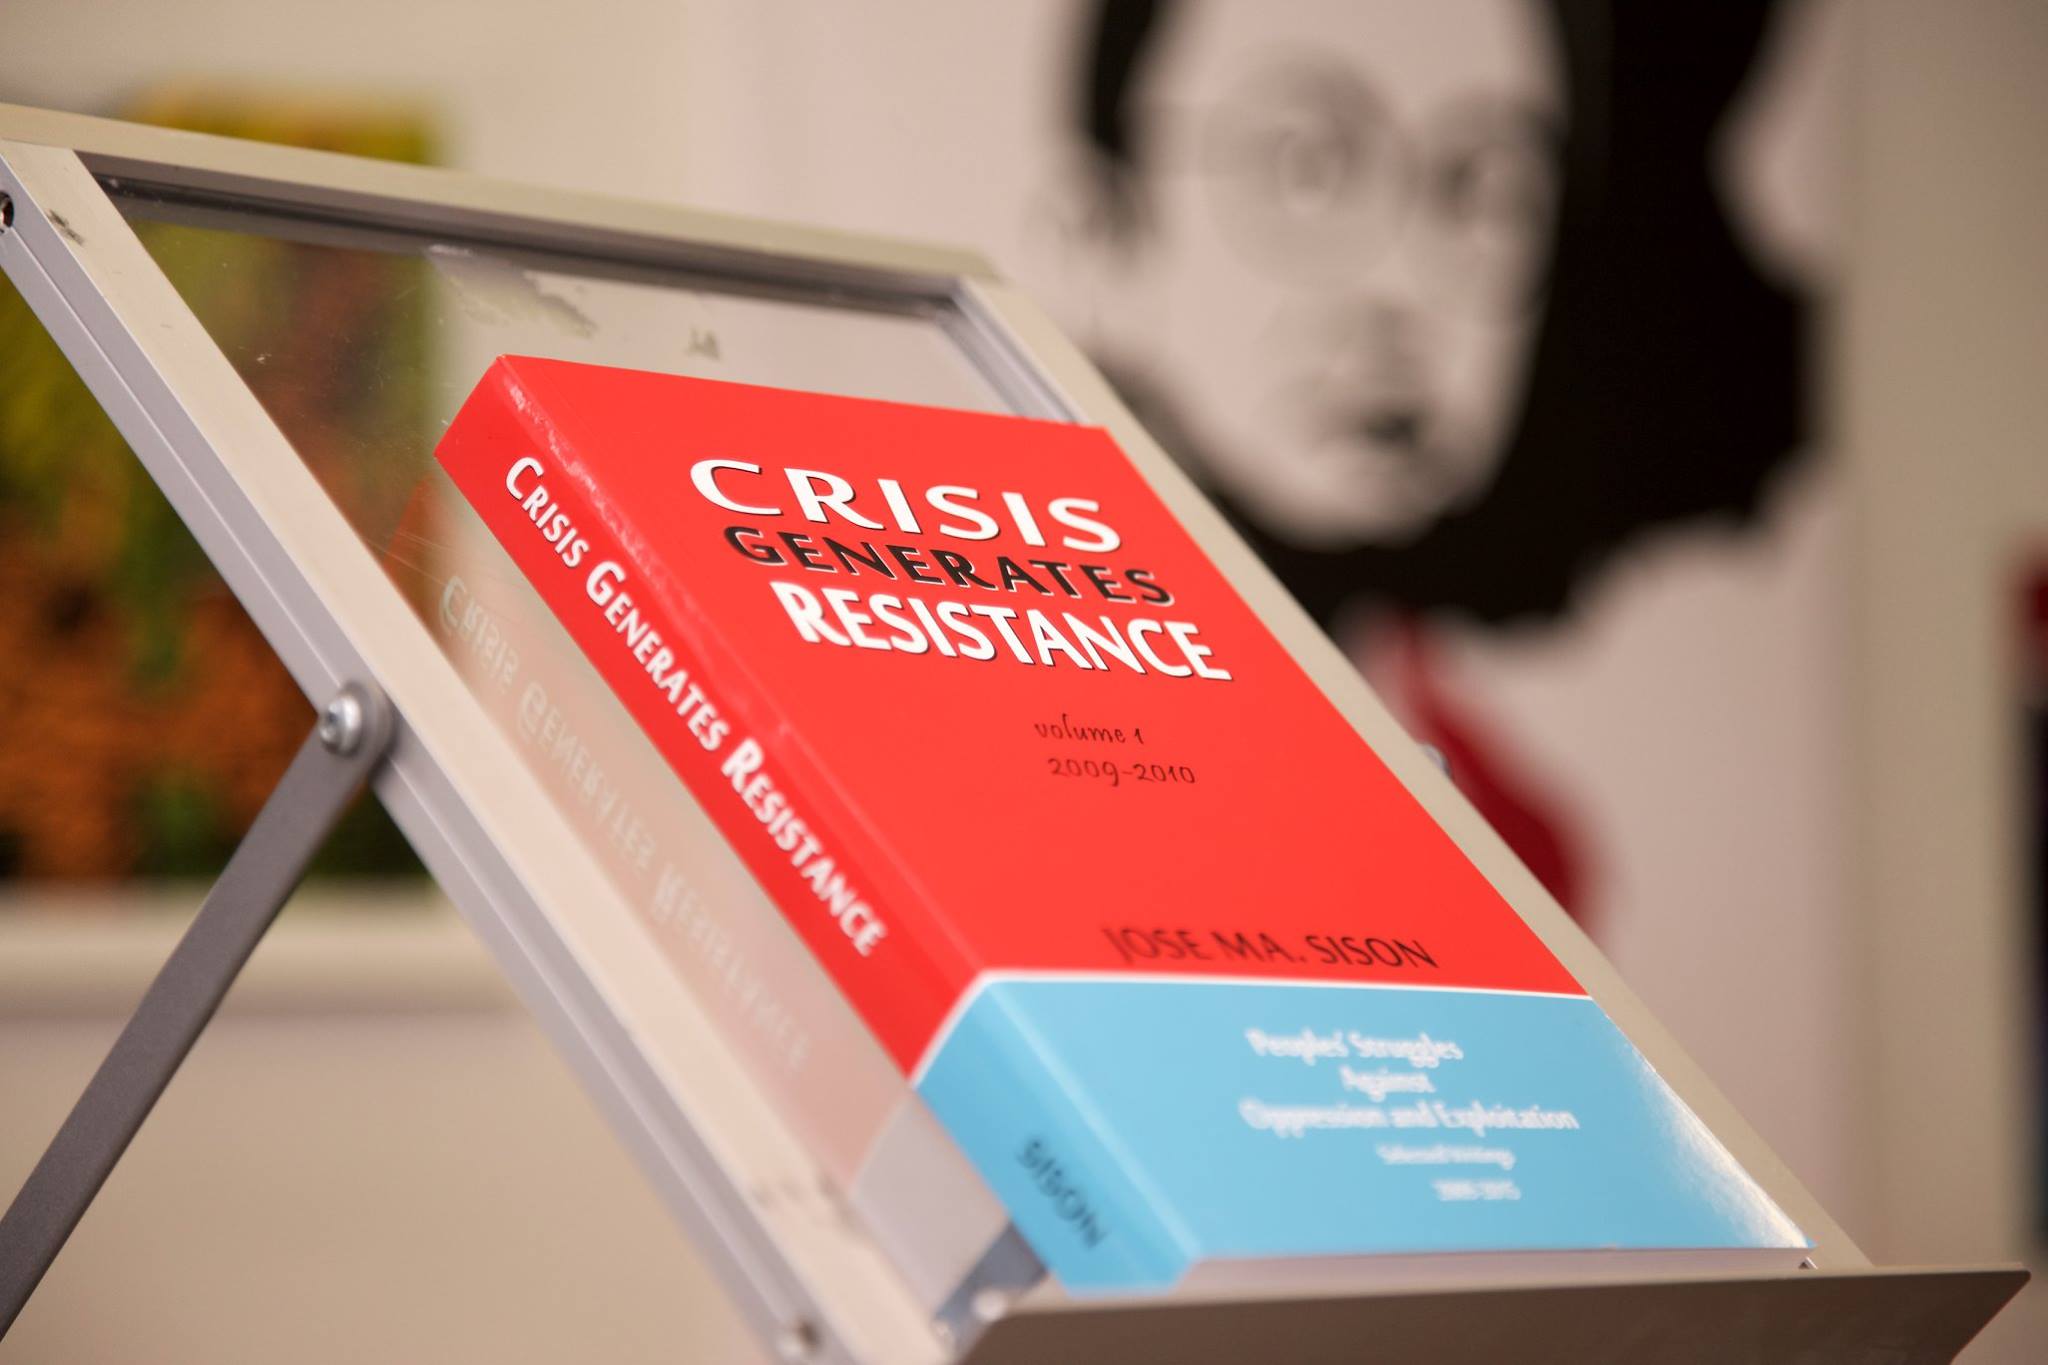 A NEW CRISIS COMES ON TOP OF THE PREVIOUS ONE, GREATER RESISTANCE BY THE PEOPLE IS NEEDED